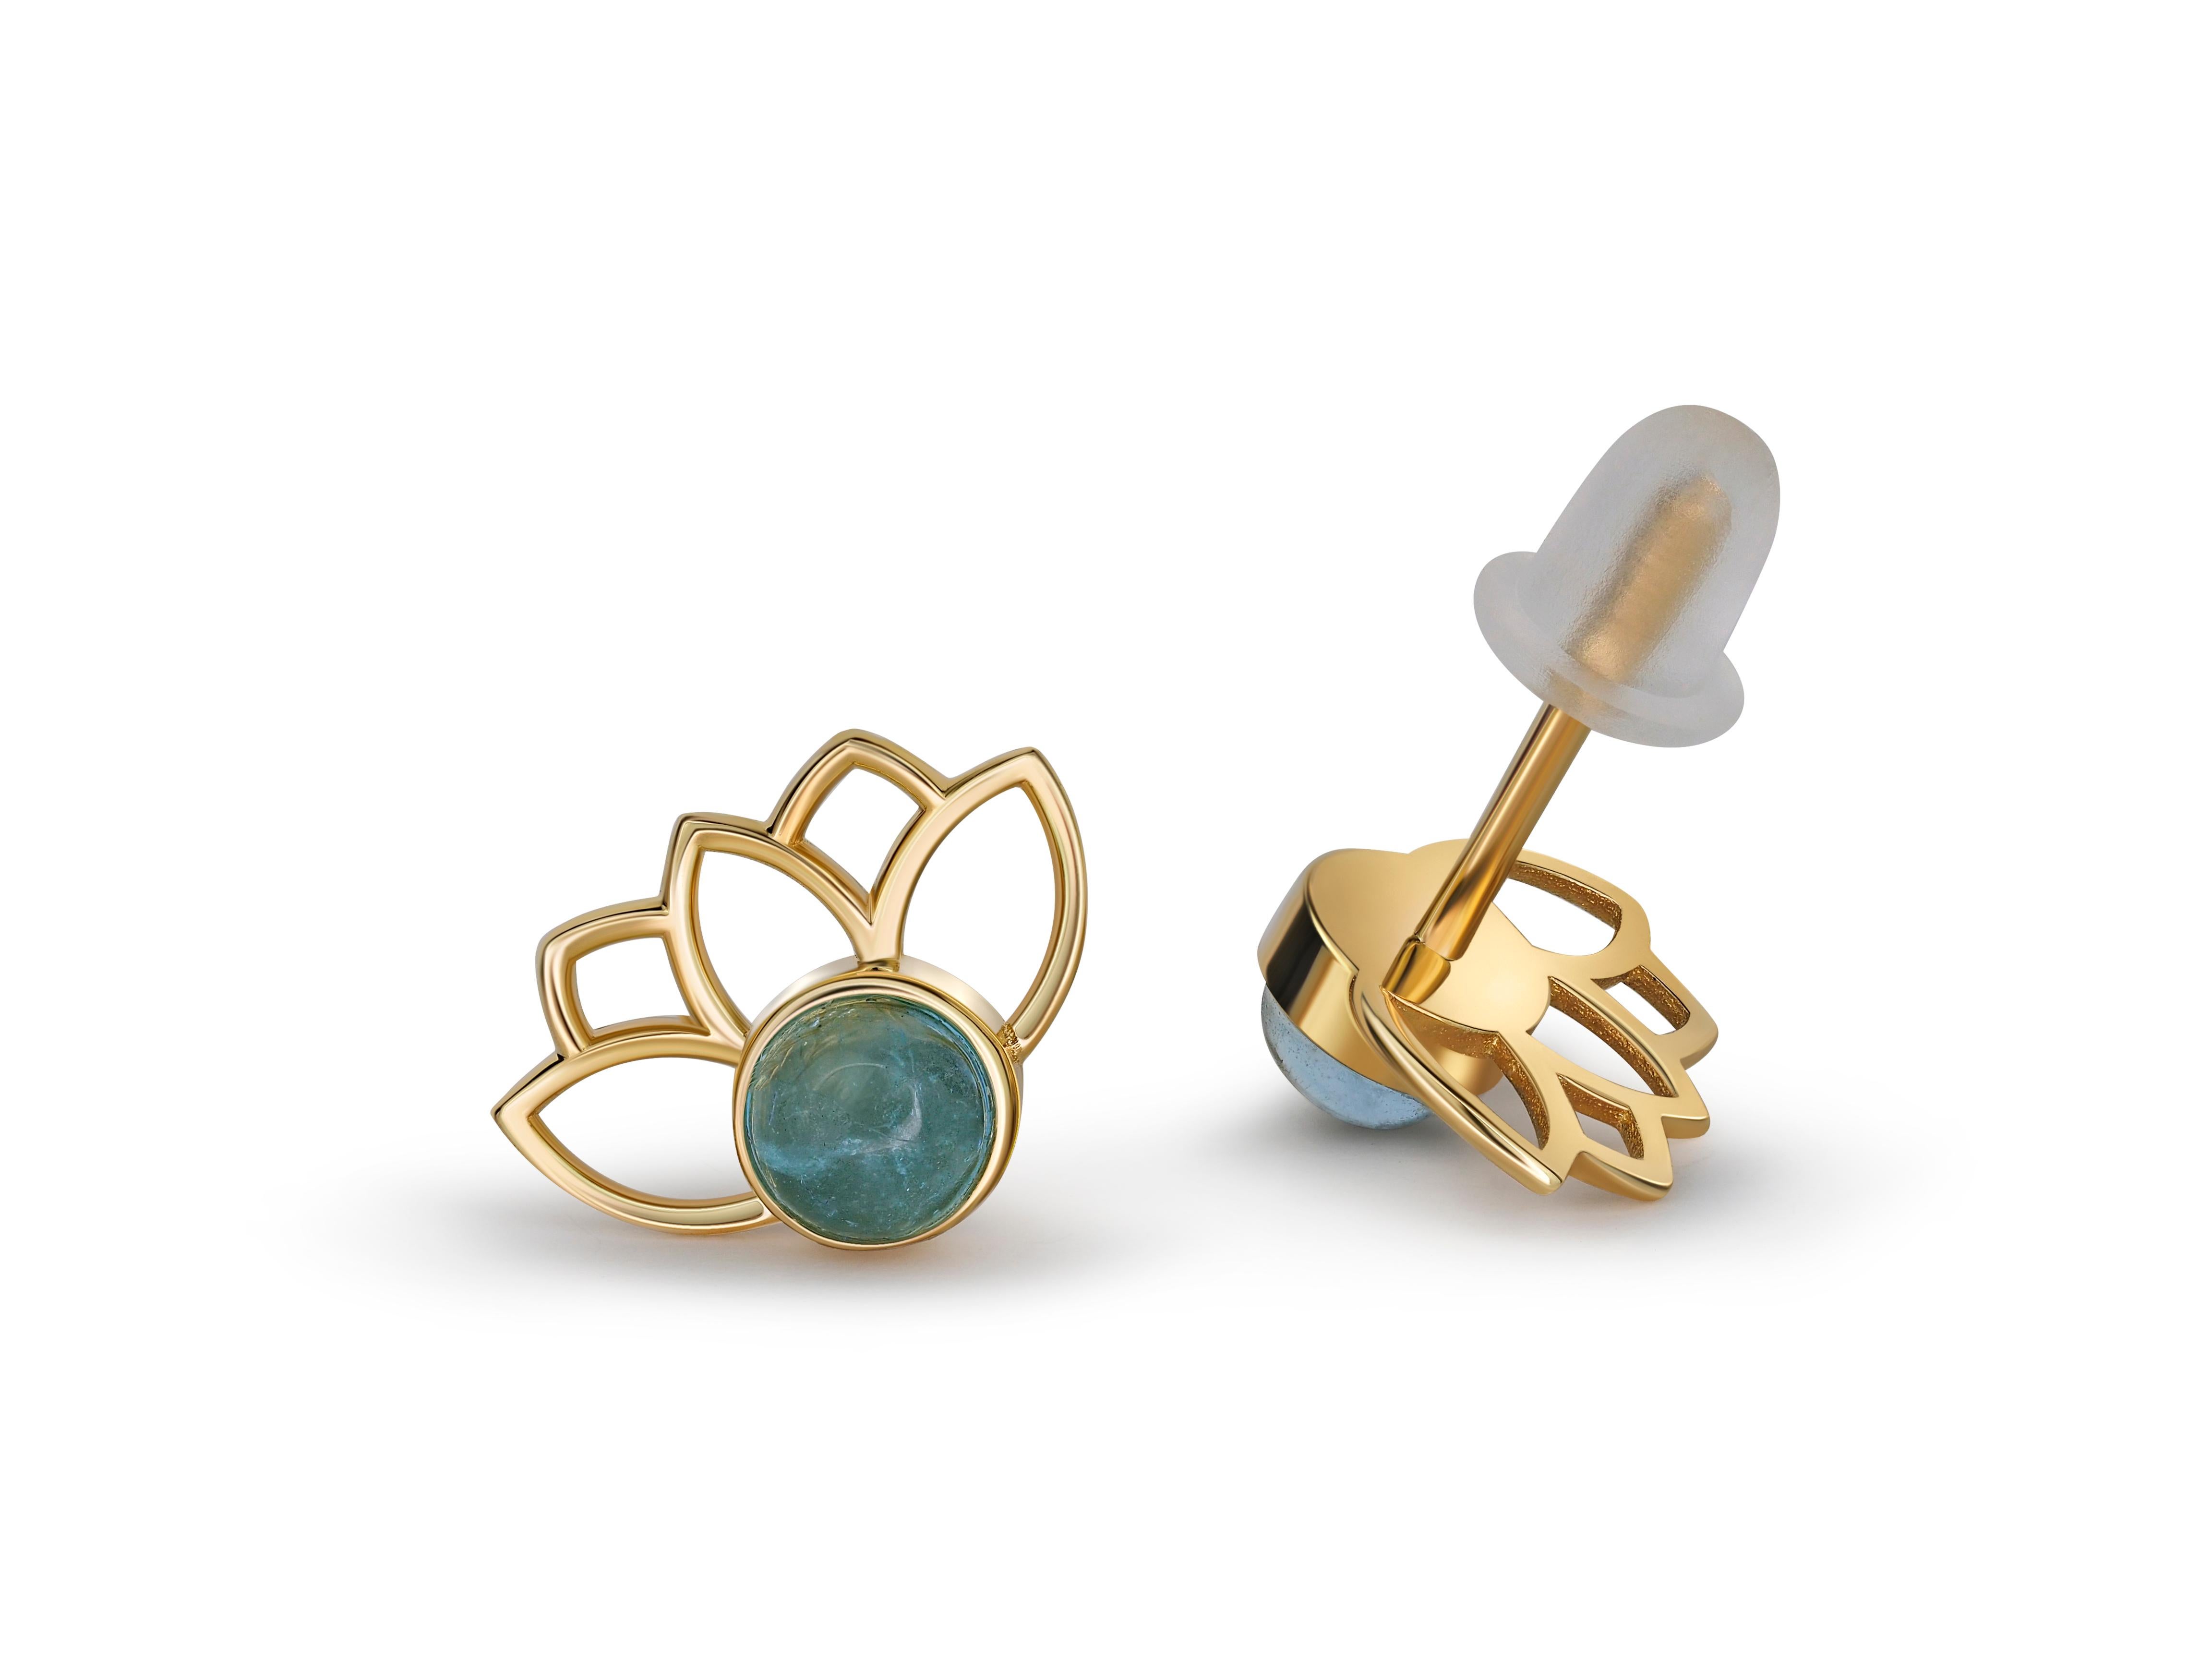 Modern Lotus Earrings Studs with Aquamarines in 14k Gold